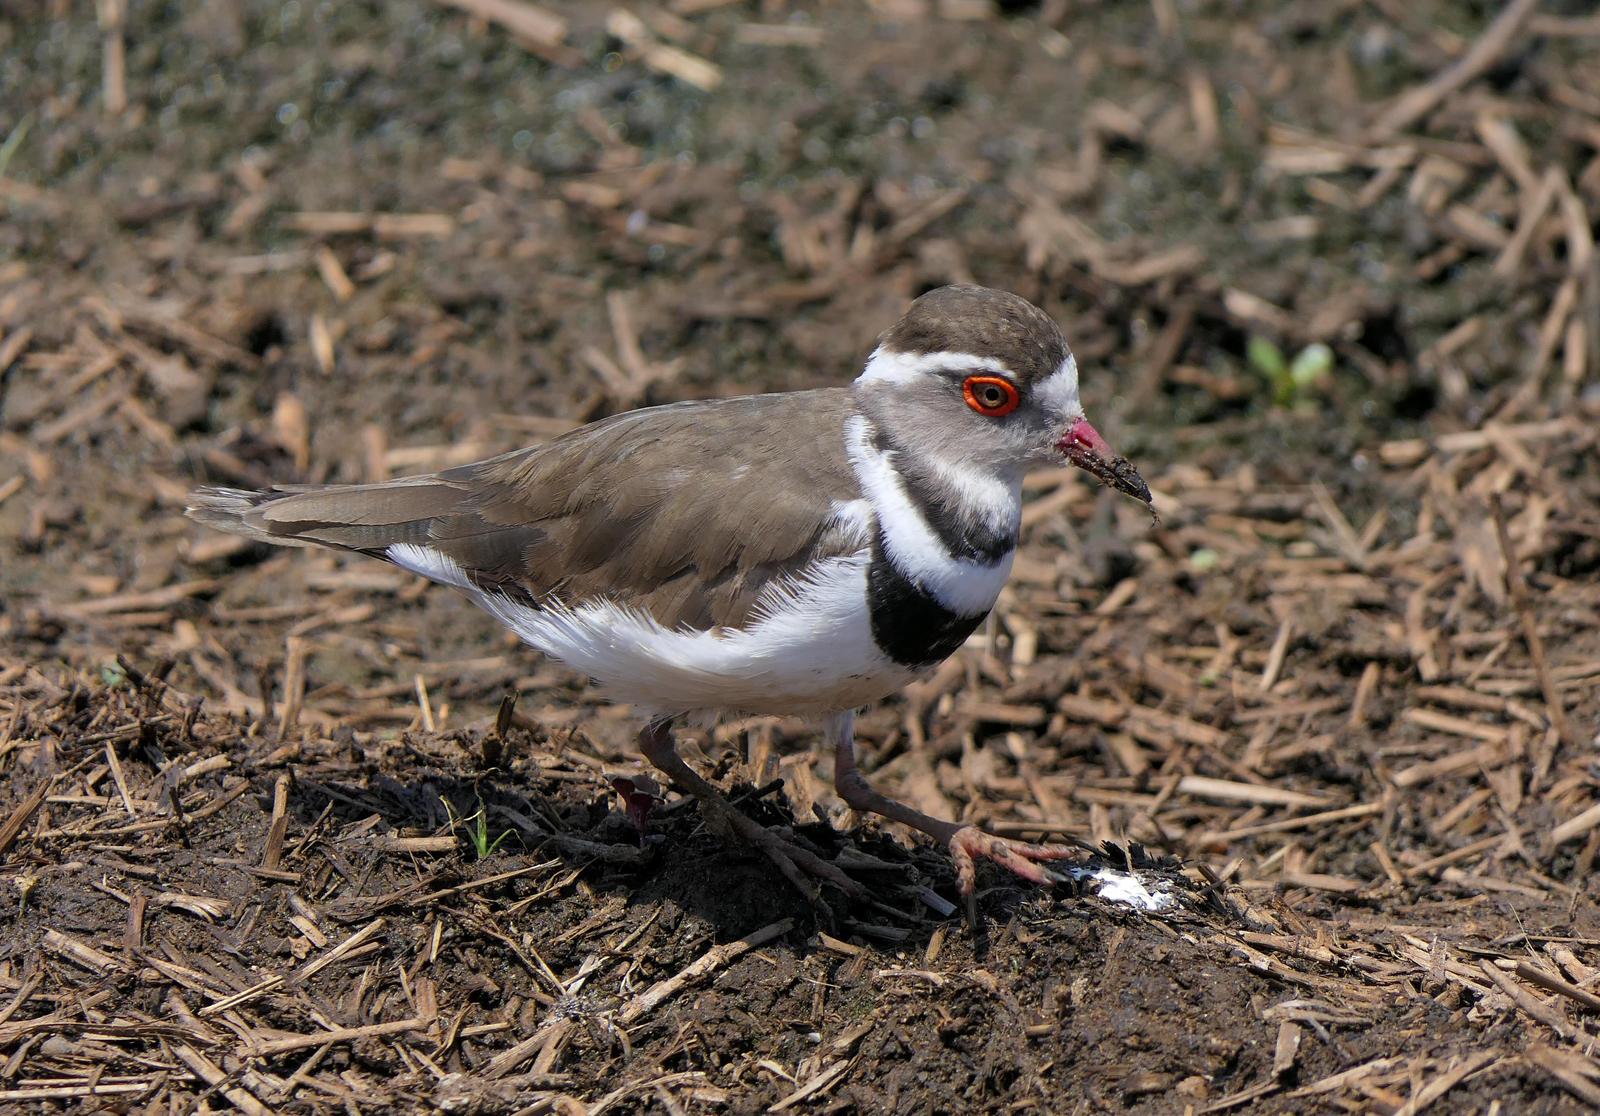 Three-banded Plover Photo by Randy Siebert